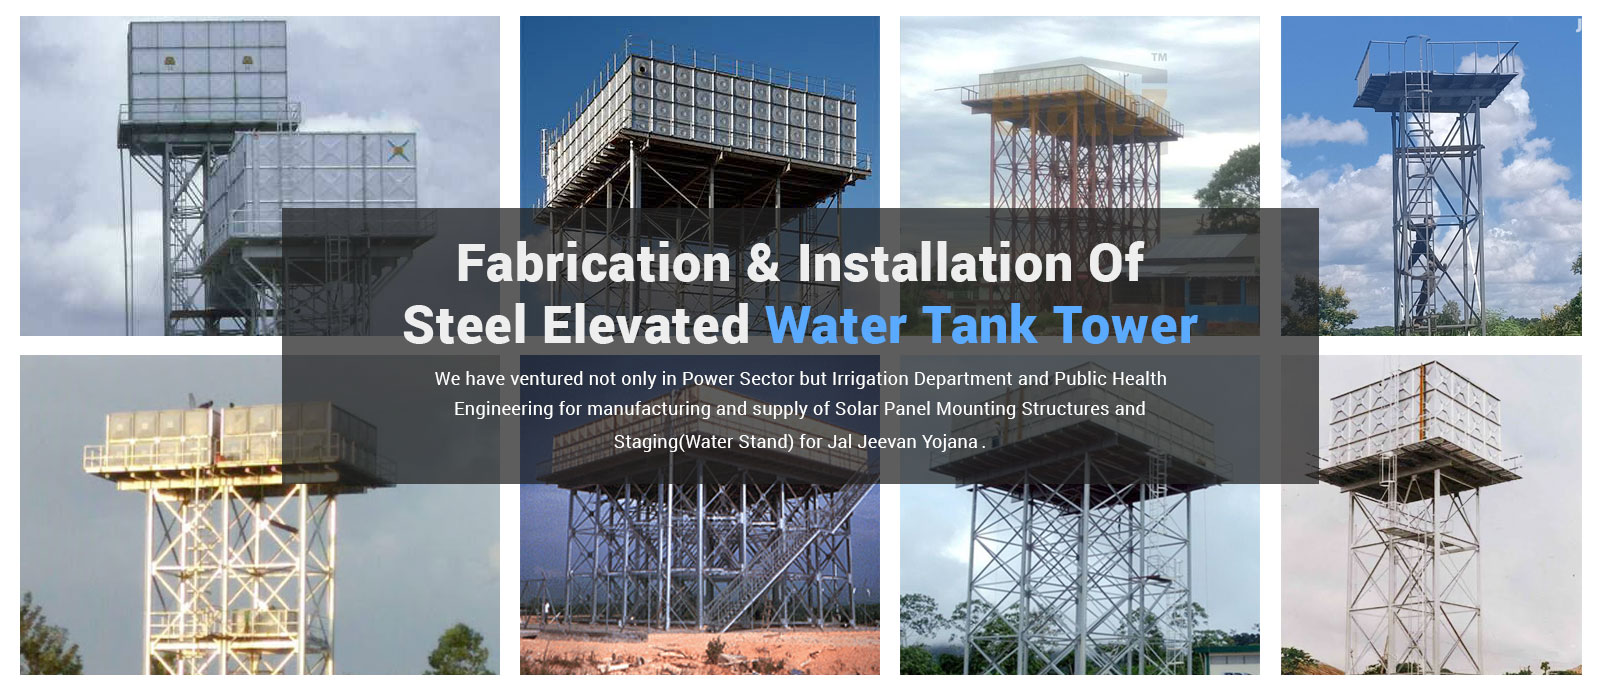 Fabrication & Installation Of Steel Elevated Water Tank Tower